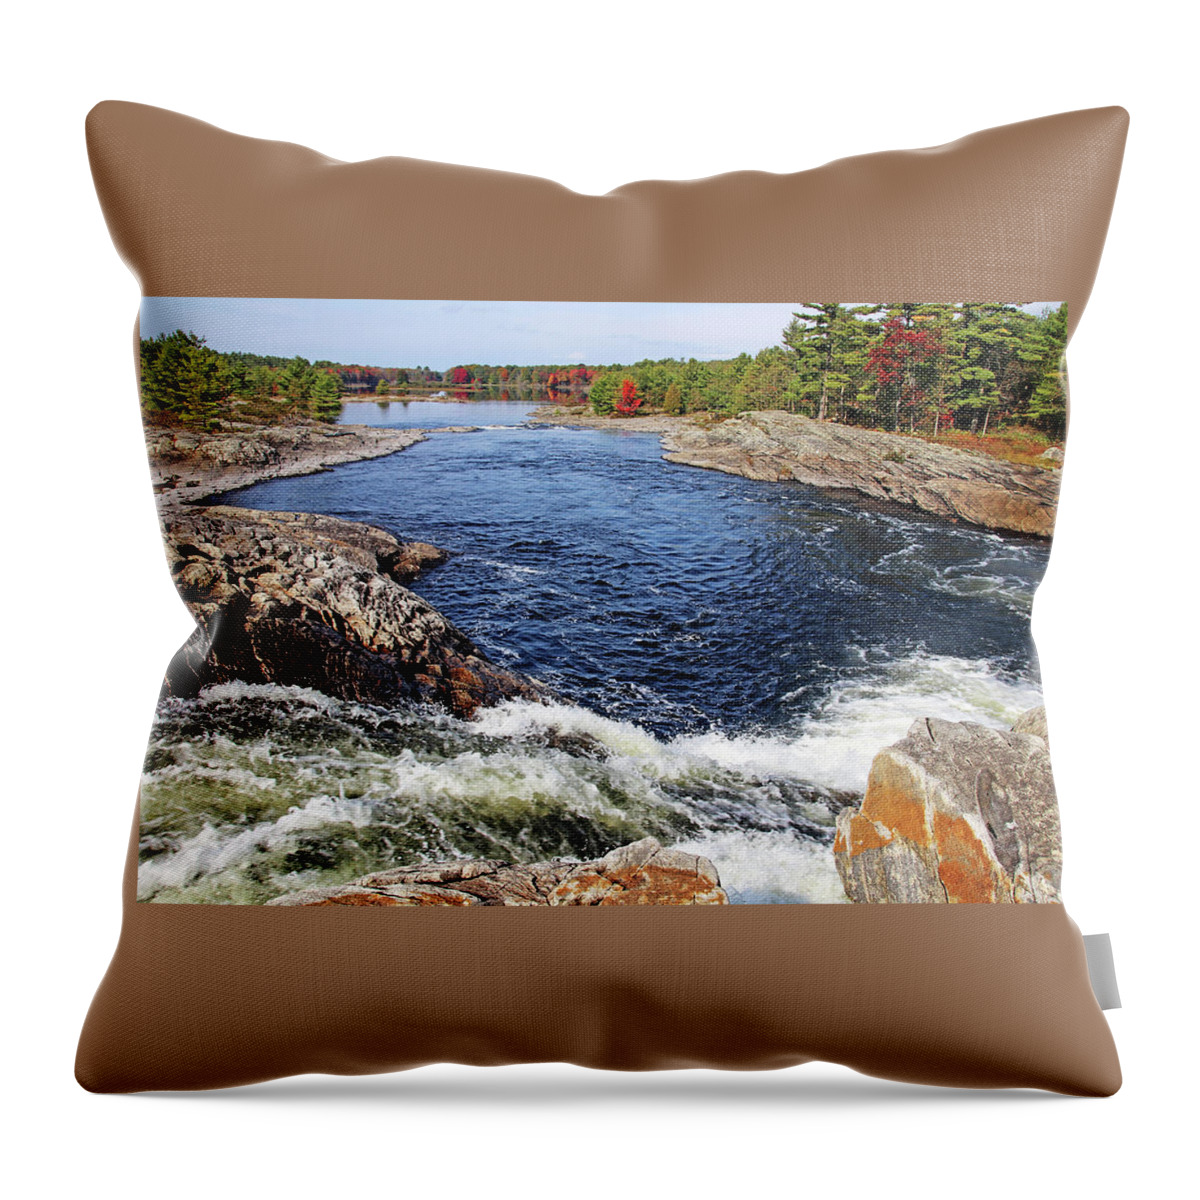 Moon River Throw Pillow featuring the photograph Moon River Waterfalls VI by Debbie Oppermann